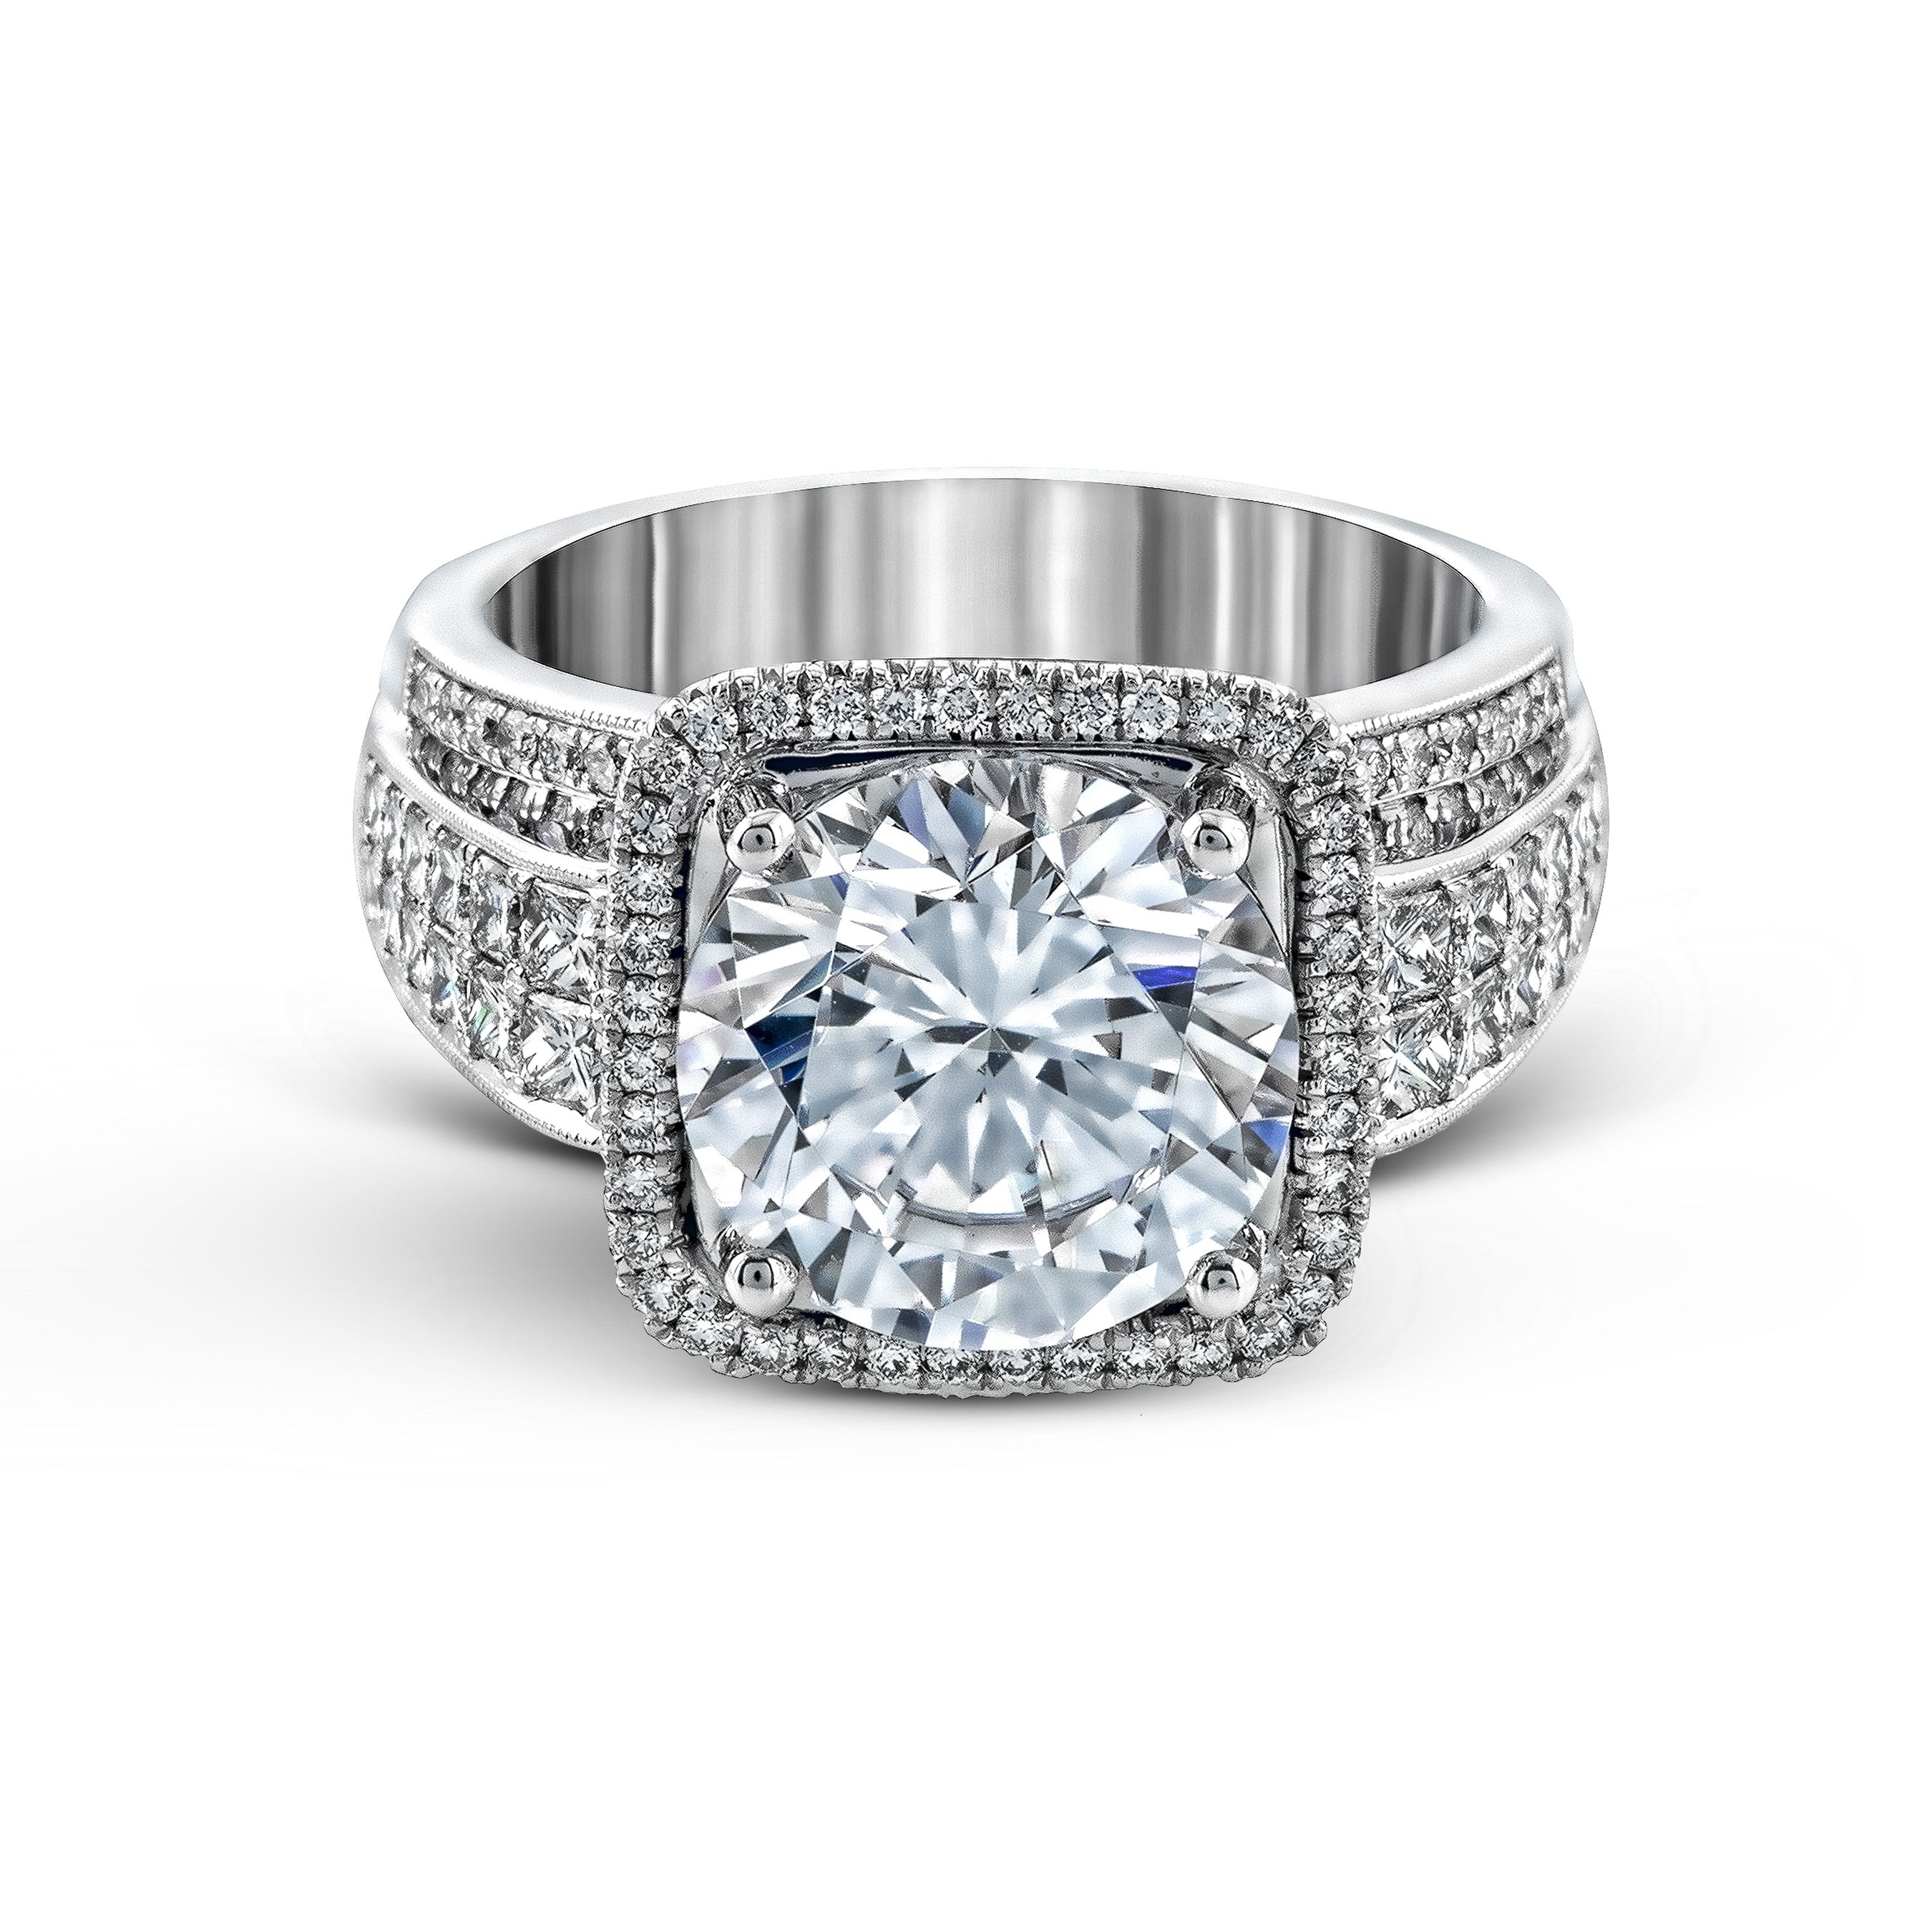 MR2097 Nocturnal Sophistication Collection Platinum Round Cut Engagement Ring